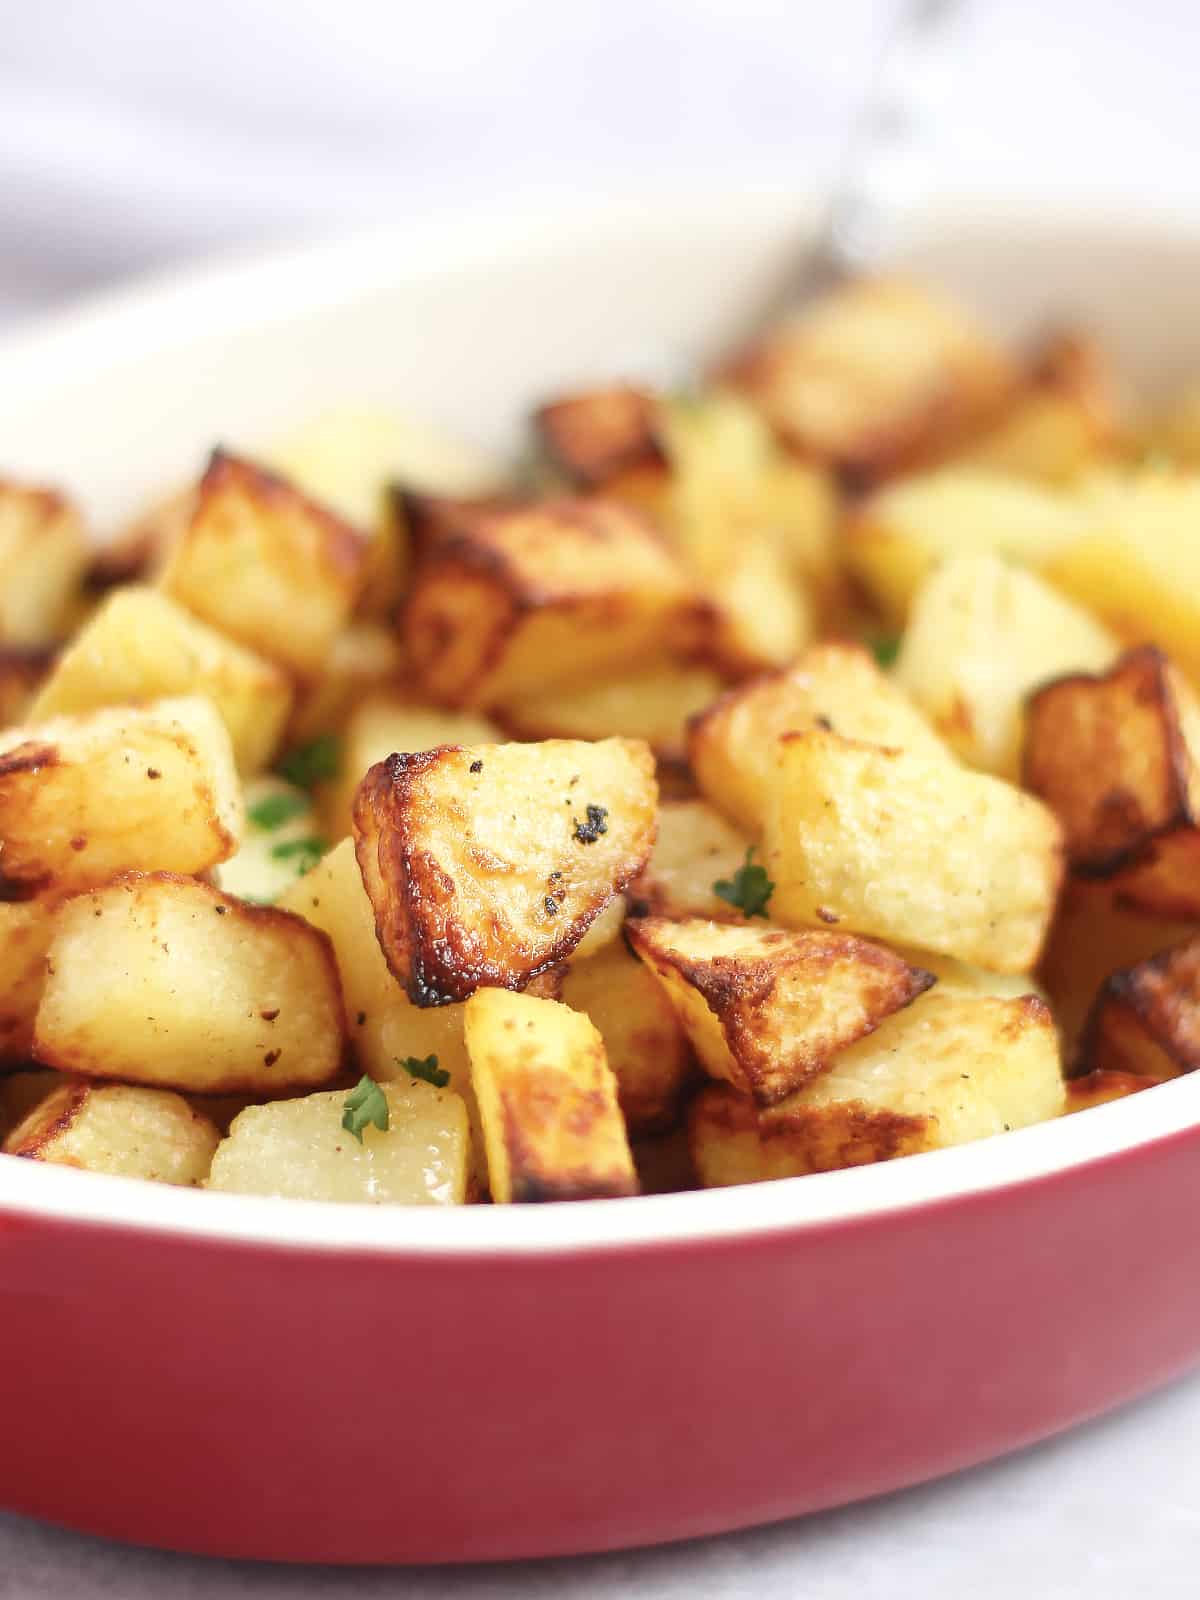 Diced potatoes with crispy edges in a red serving dish.